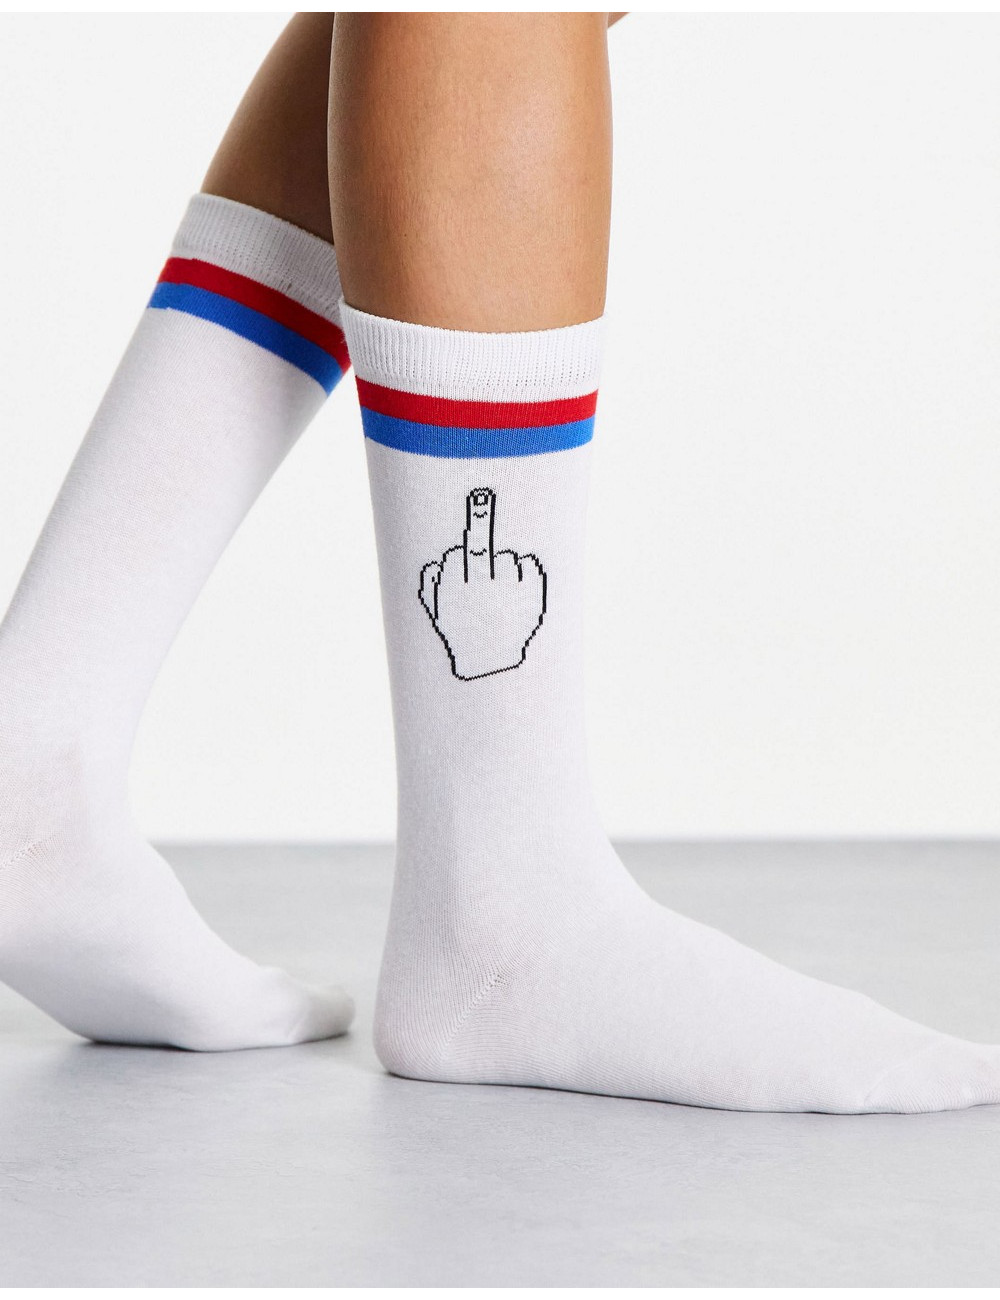 Typo socks with stripe and...